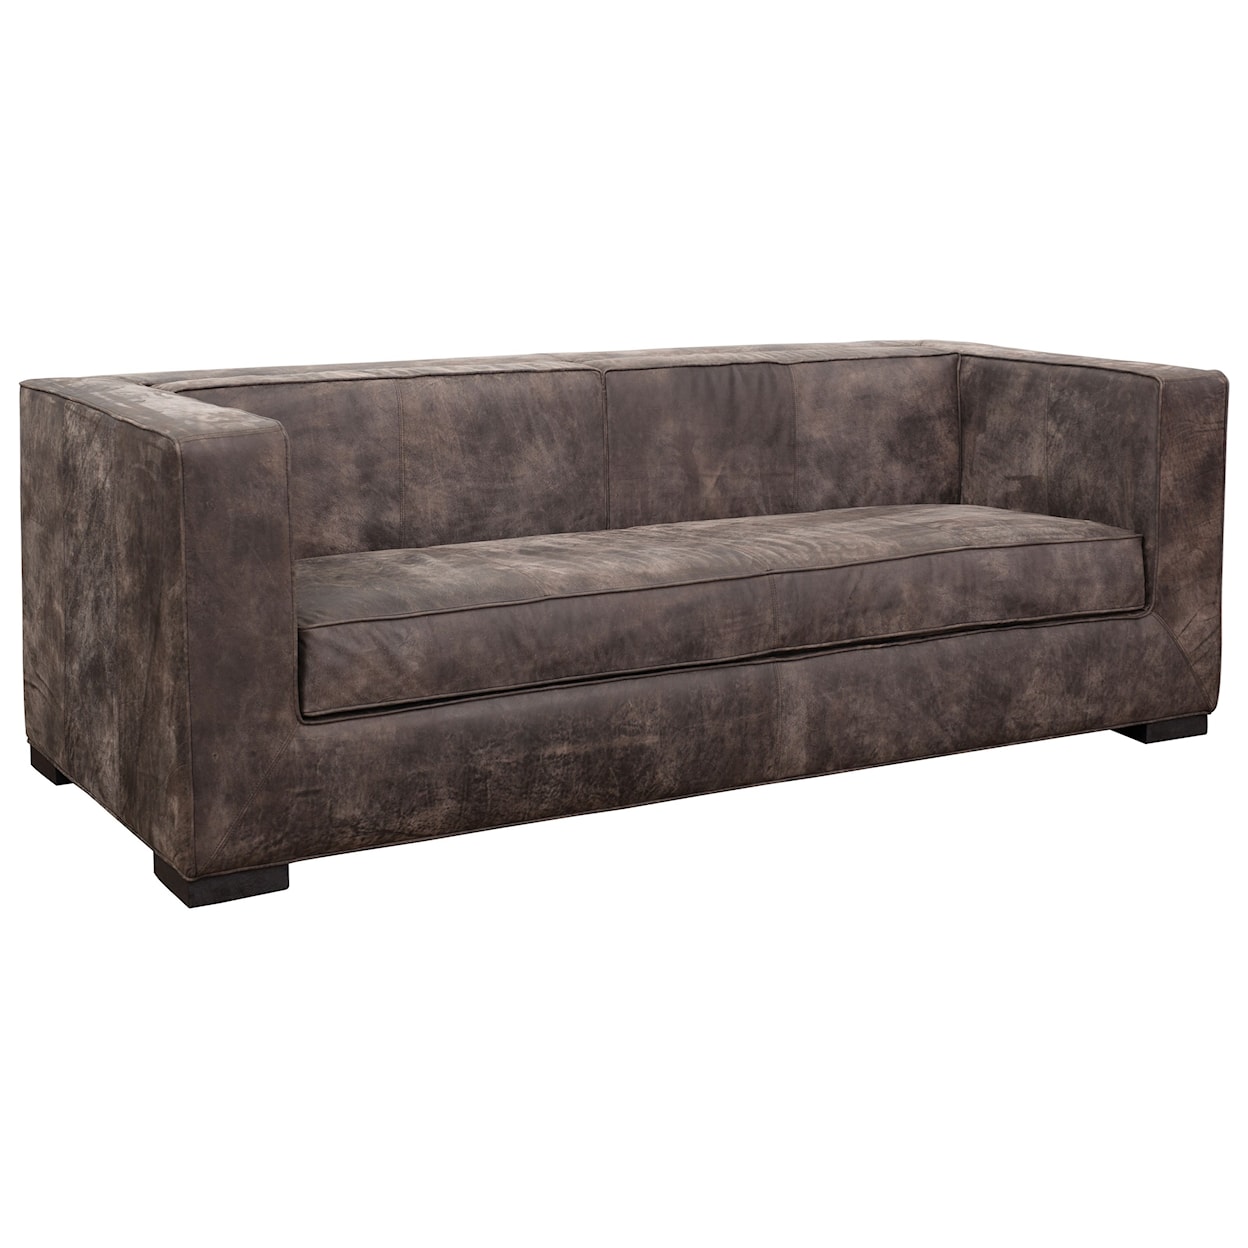 Accentrics Home TruModern Leather Shelter Sofa